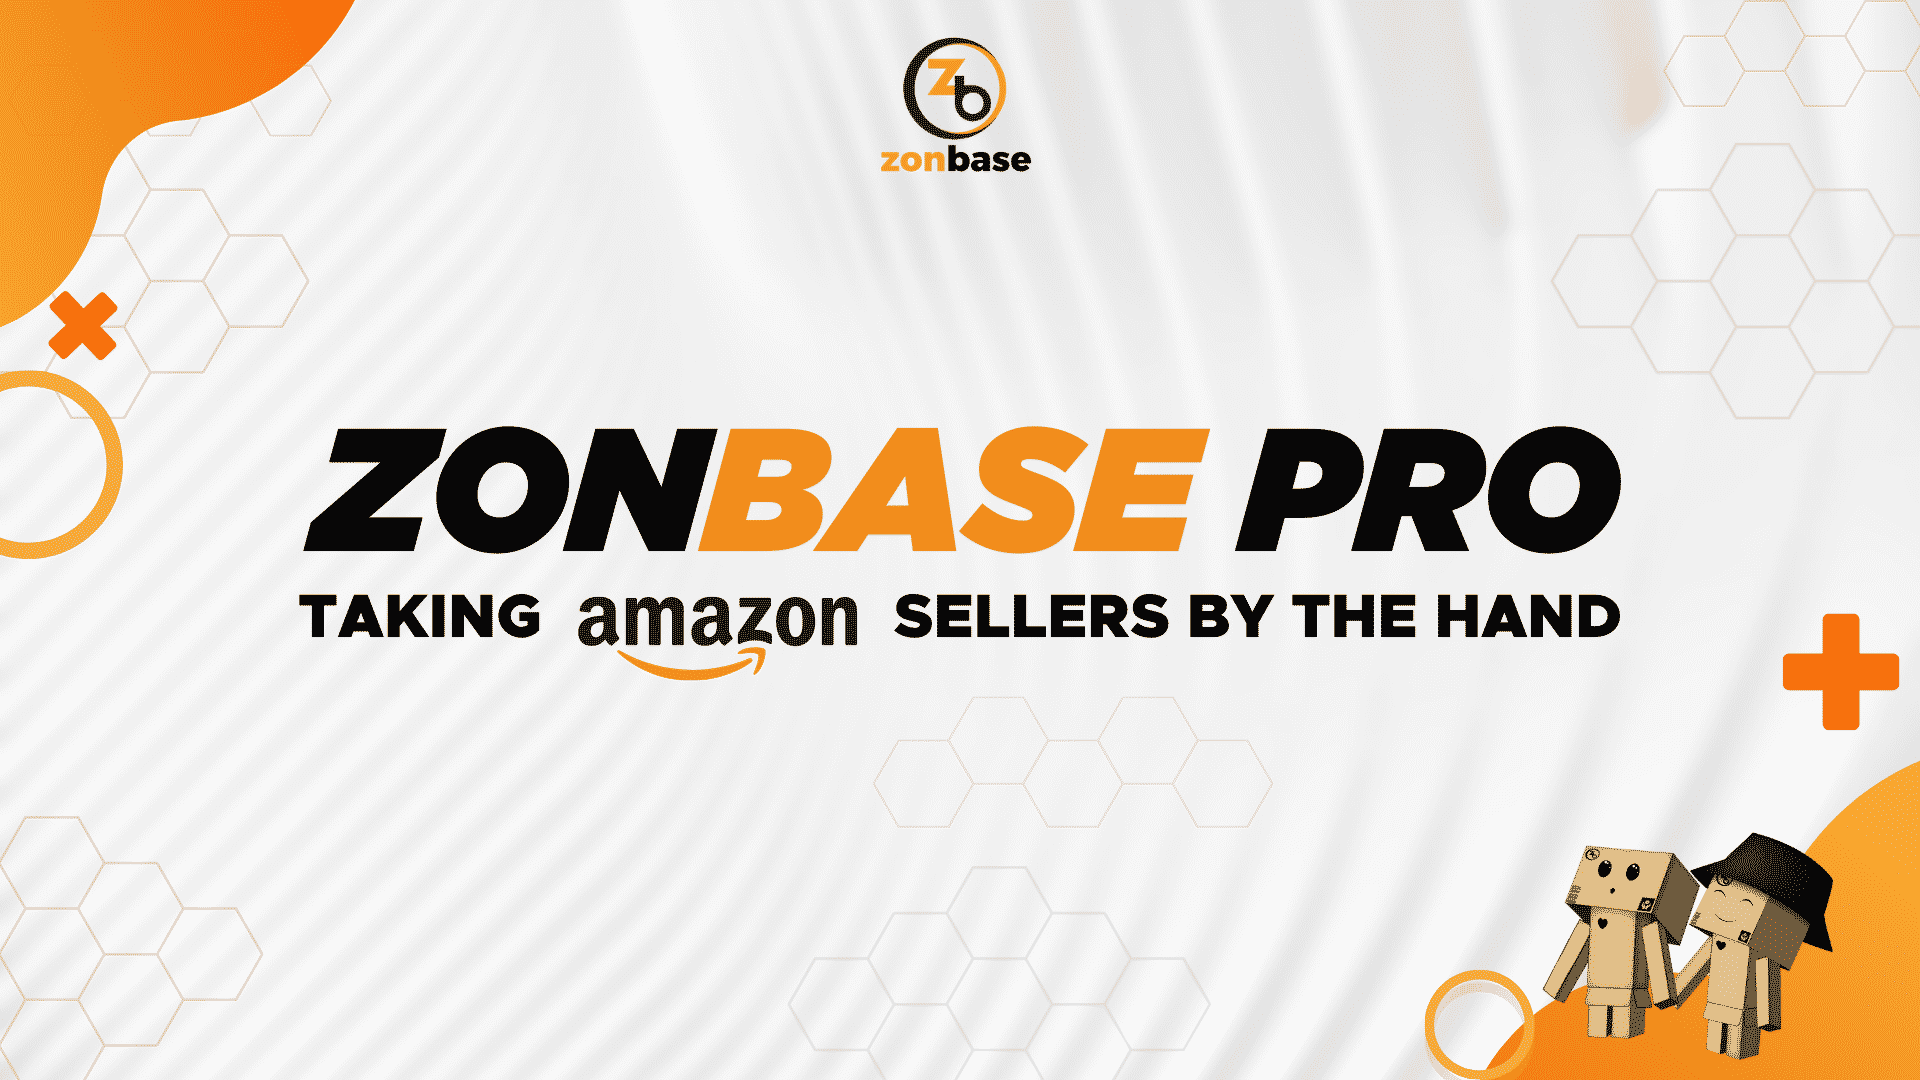 Zonbase Pro: Taking Amazon Sellers By The Hand